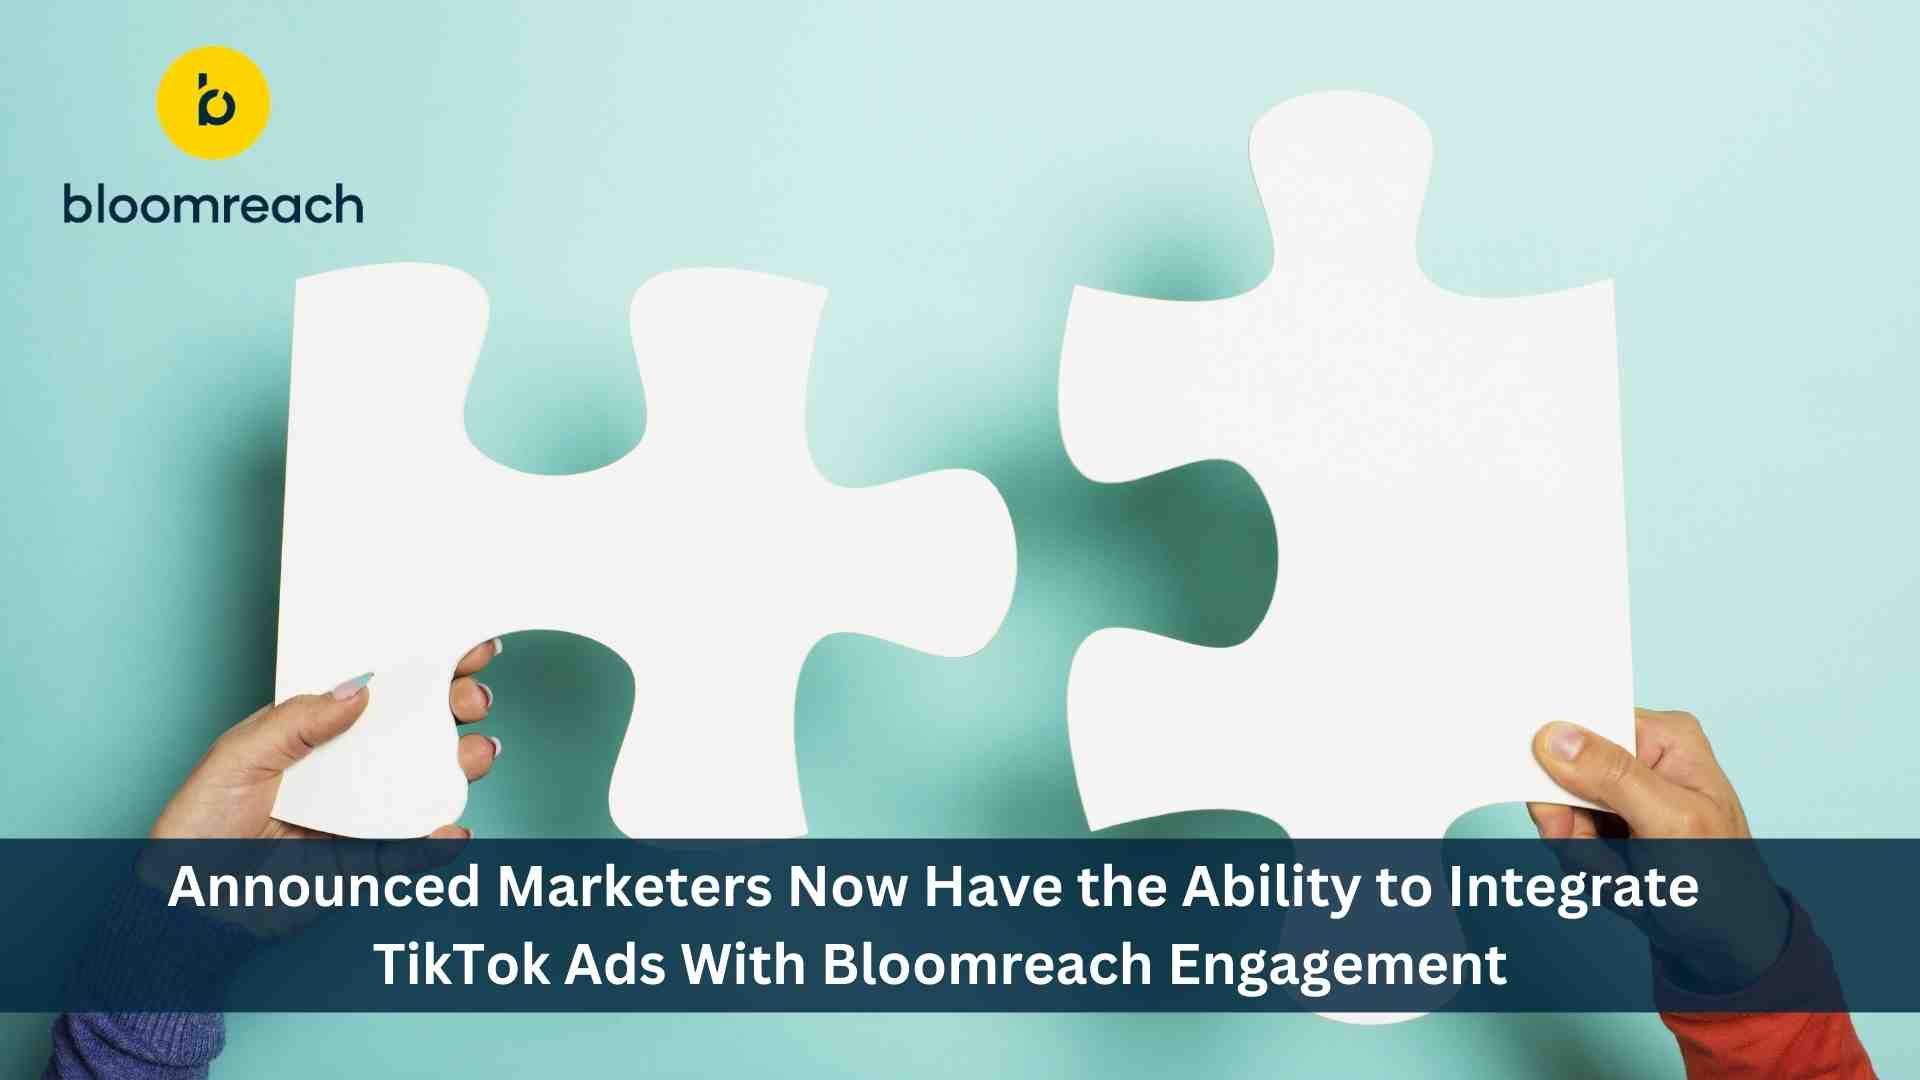 Bloomreach Adds TikTok to its Growing List of Integrations, Helping Marketers Optimize Ad Spend With Better Targeted Content